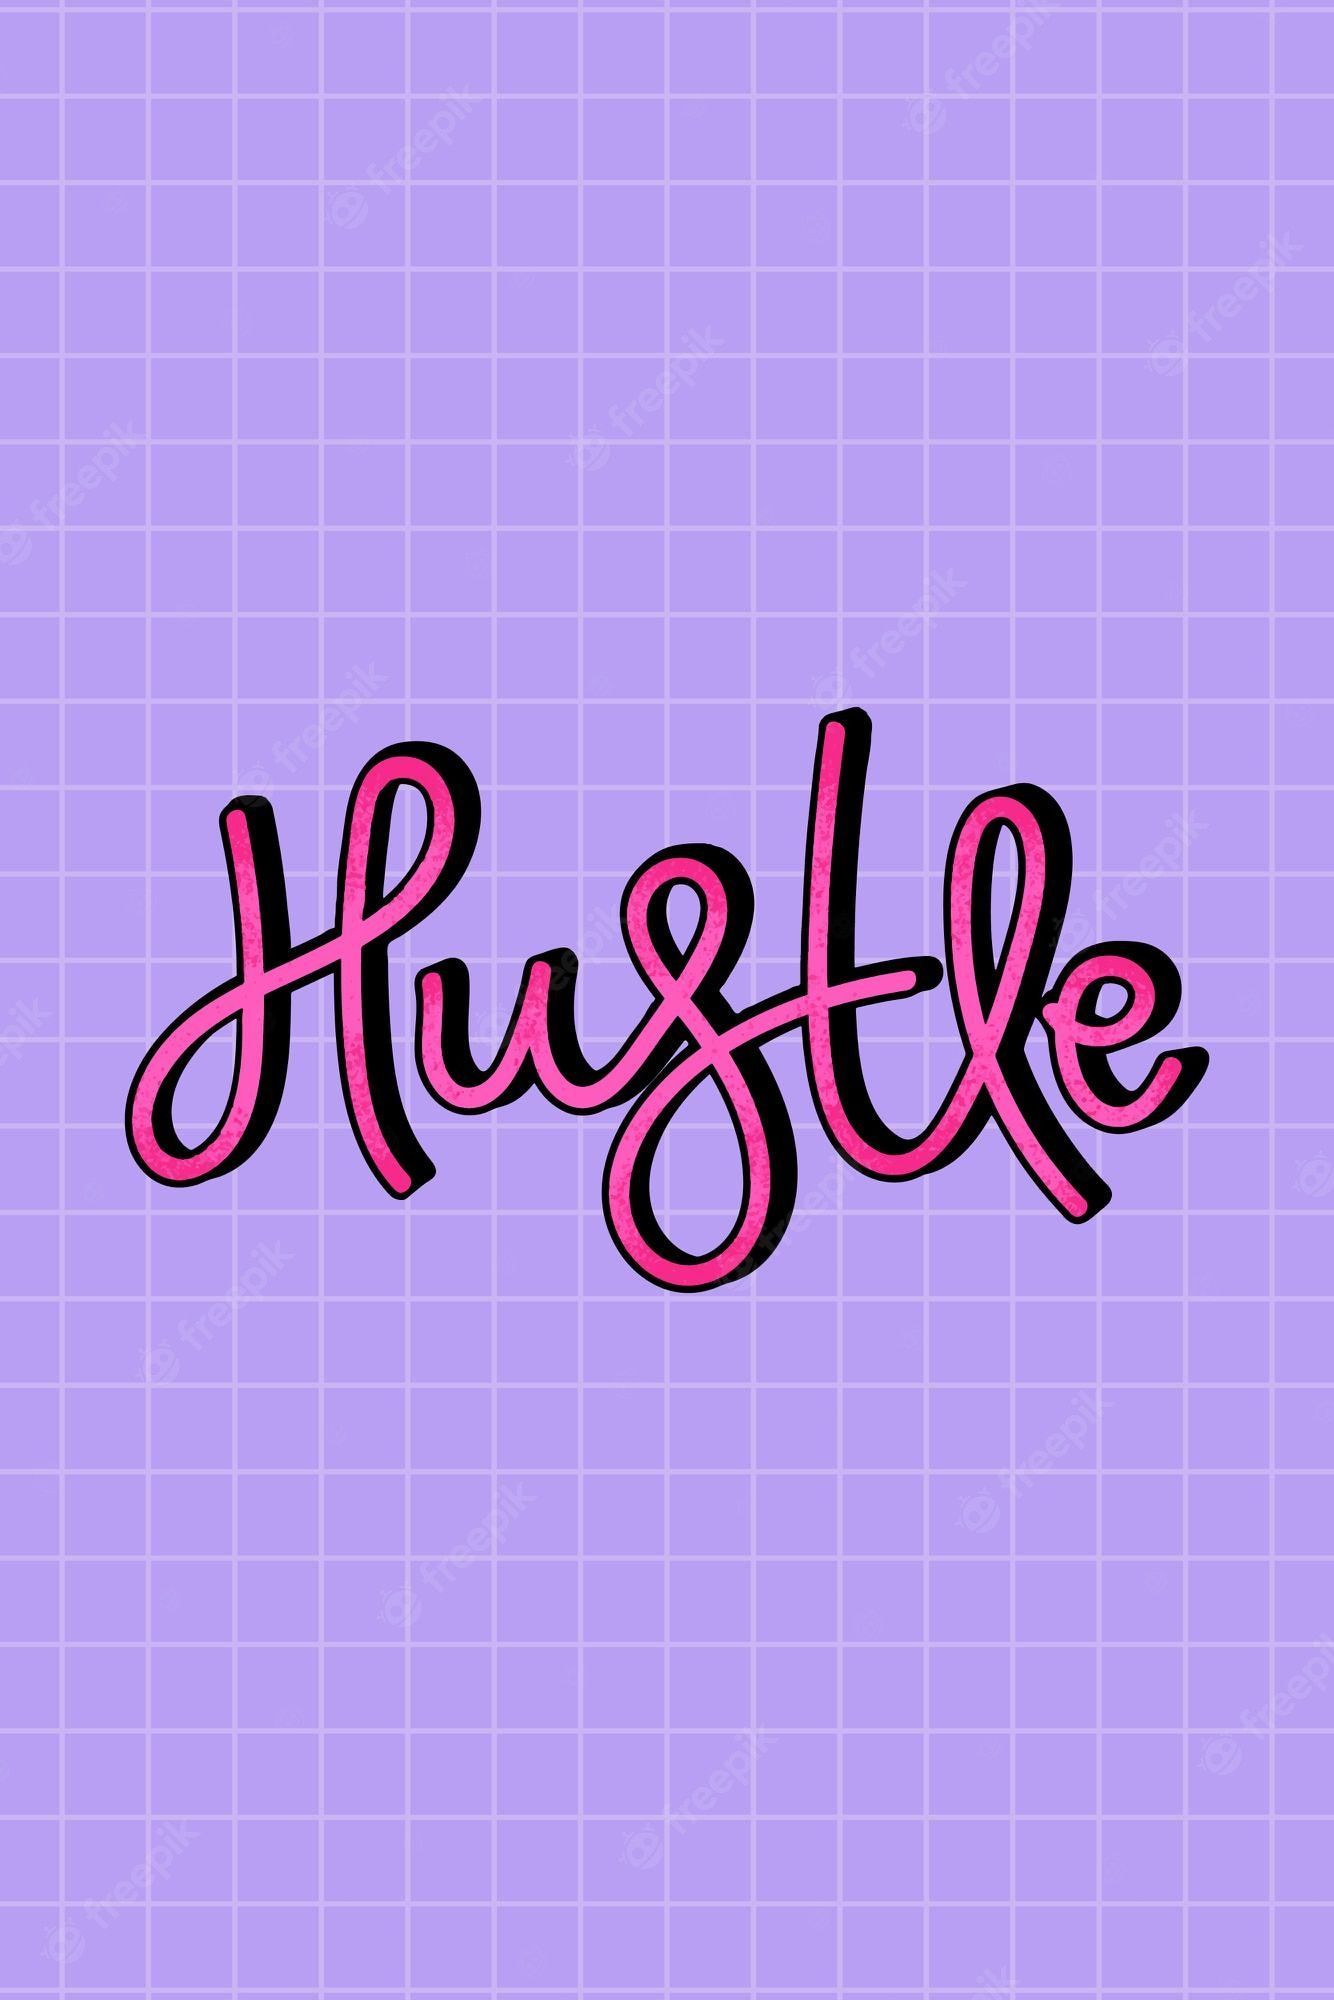 Free Vector. Hustle text calligraphy message grid background